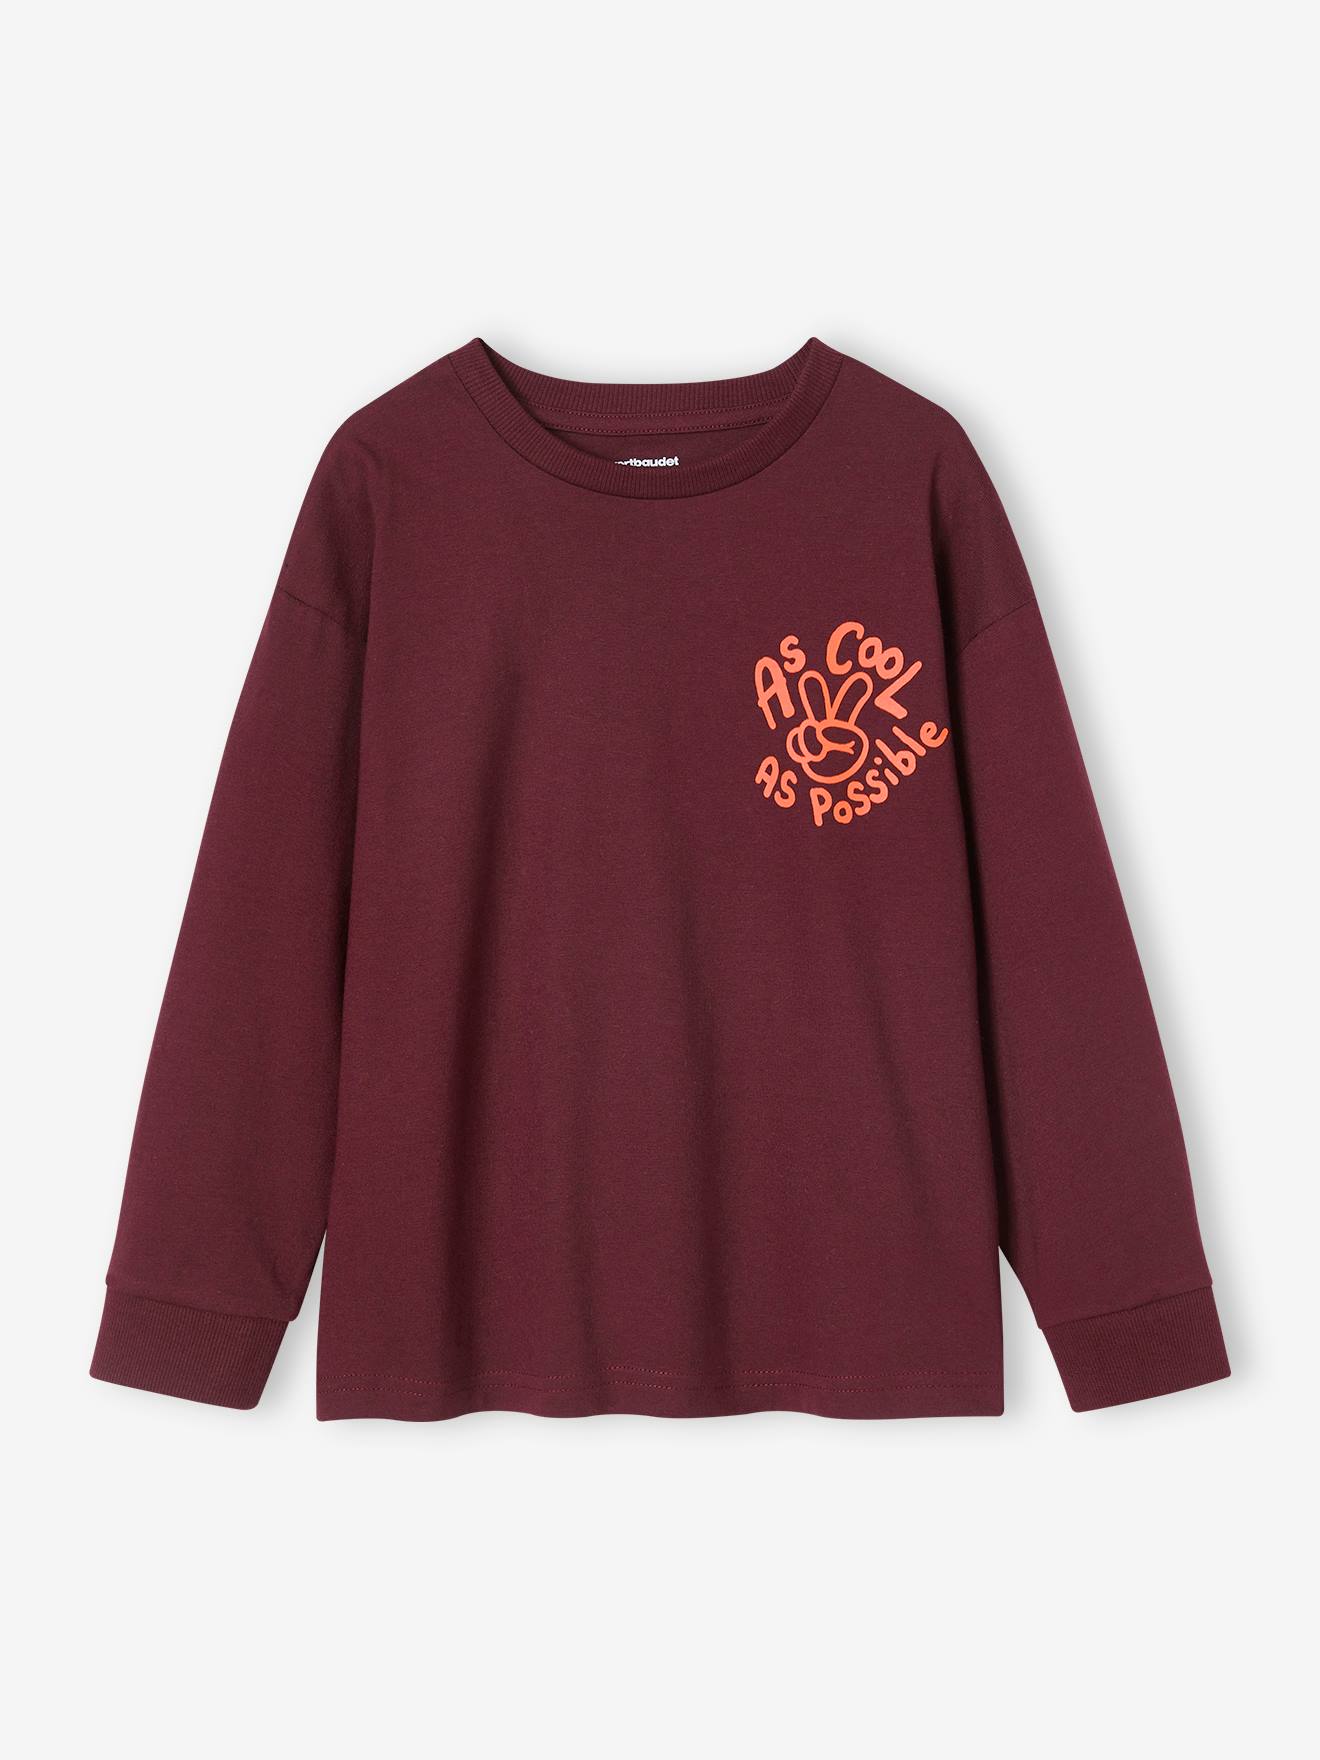 Long Sleeve Top with Cool Motif on the Chest for Boys bordeaux red